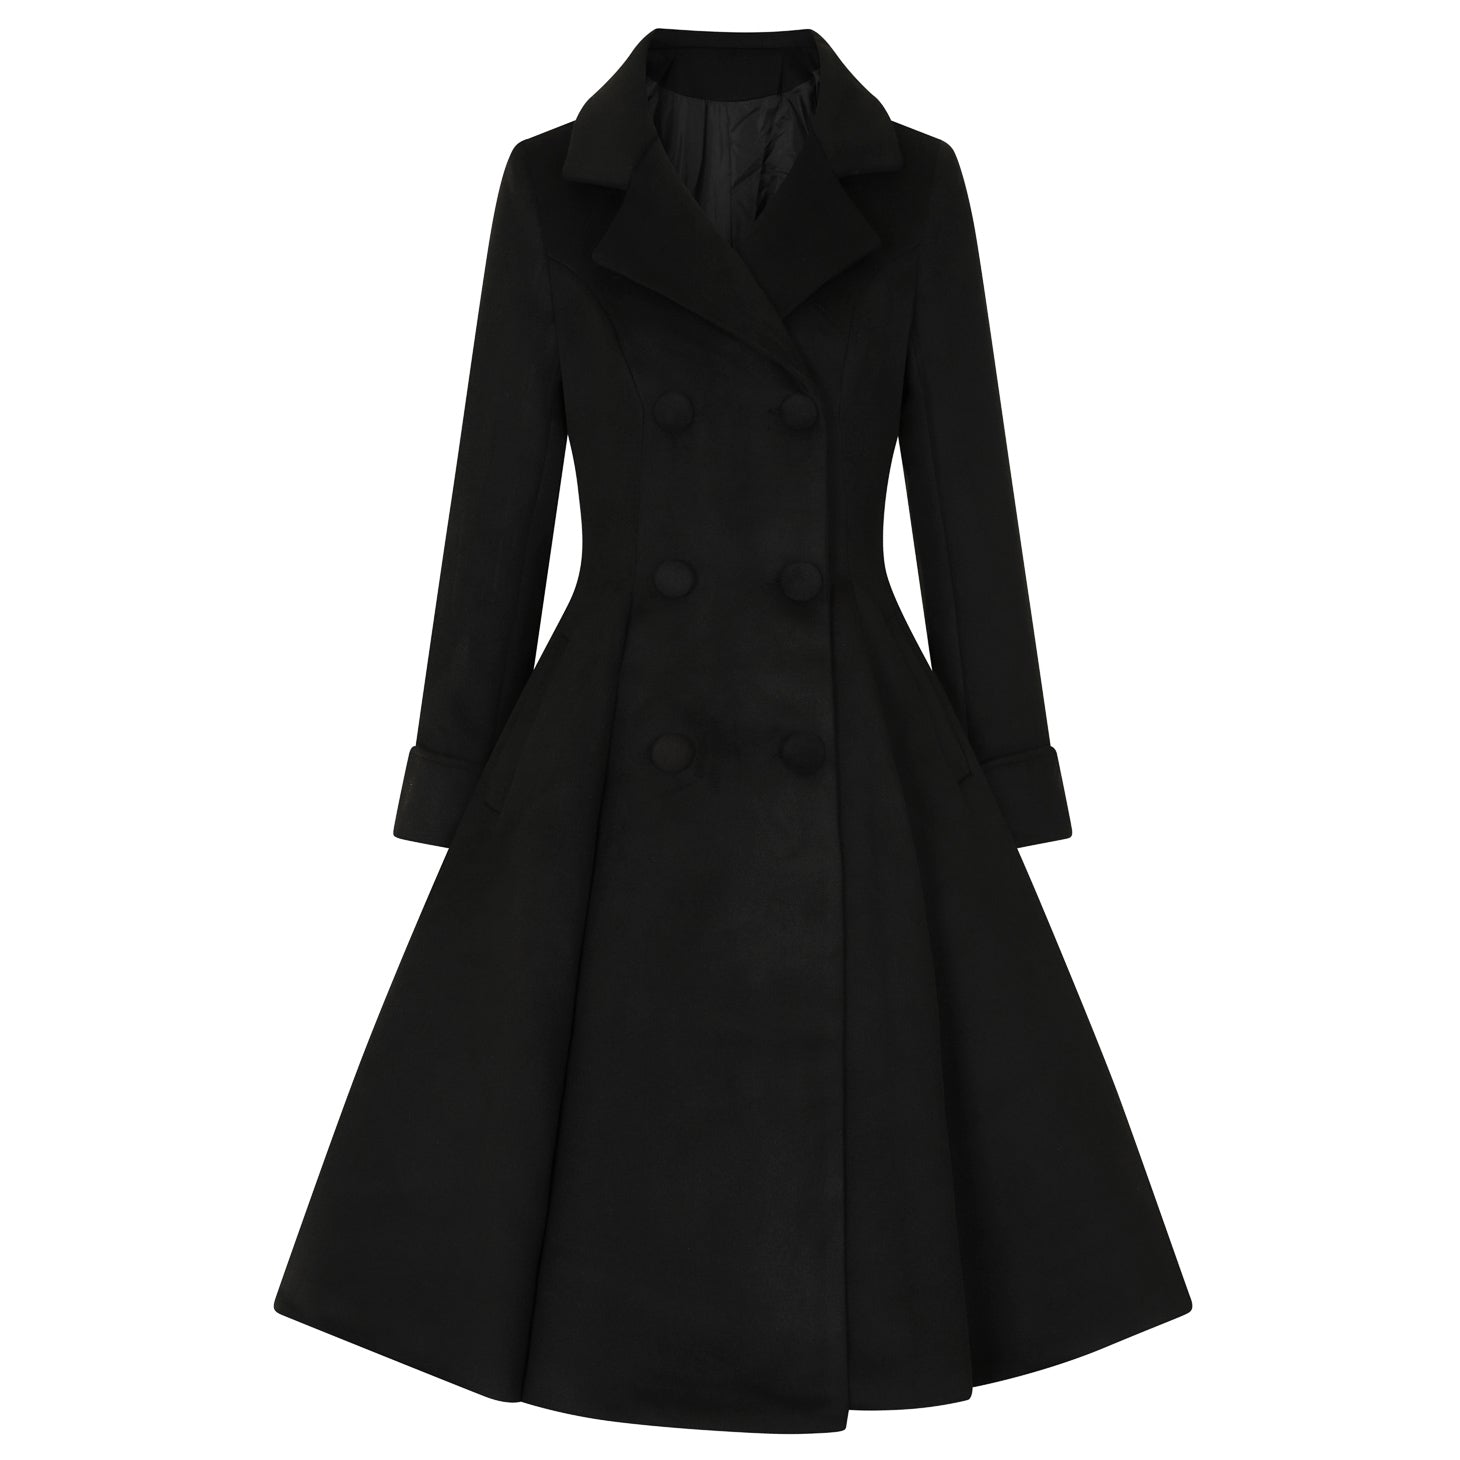 Black Vintage Inspired Classic Double Breasted Swing Coat - Pretty Kitty Fashion